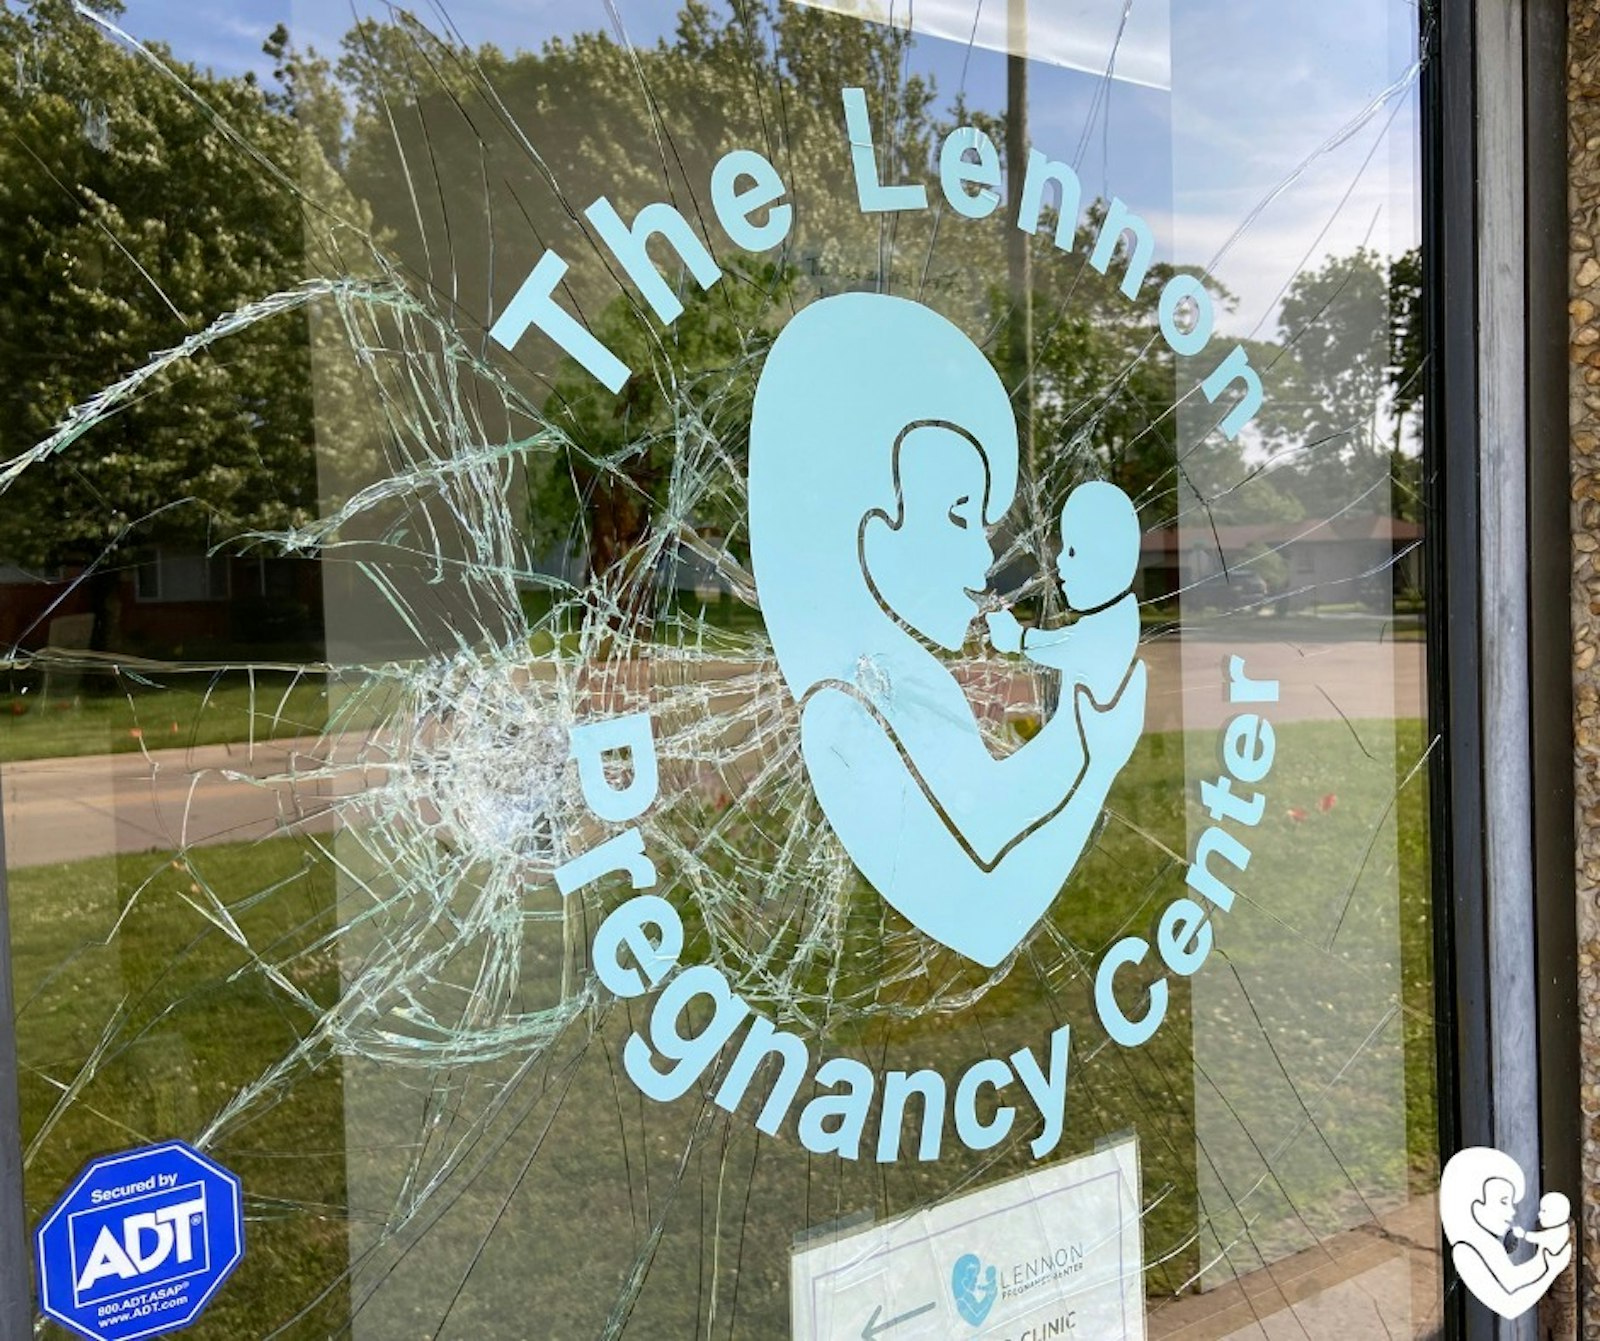 Vandals smashed nearly a dozen windows and spray-painted messages on the side of the building at the independent Lennon Pregnancy Center in Dearborn Heights on June 20. One of the messages, which has since been painted over, read, "If abortion isn't safe, neither are you." (Photos courtesy of Lennon Pregnancy Center)